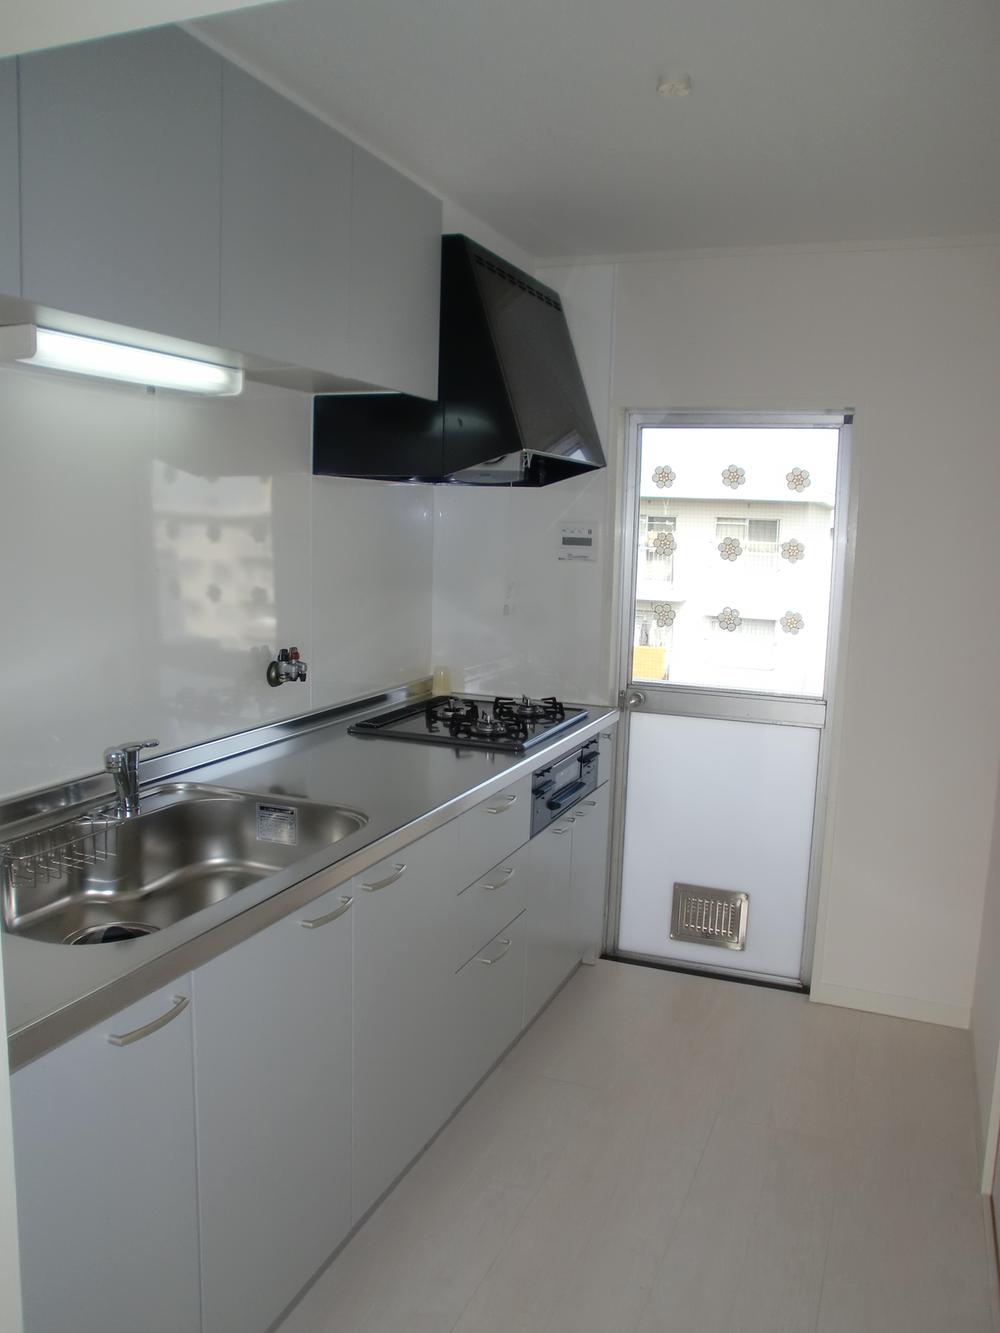 Kitchen. System kitchen had made Back door is also convenient and with